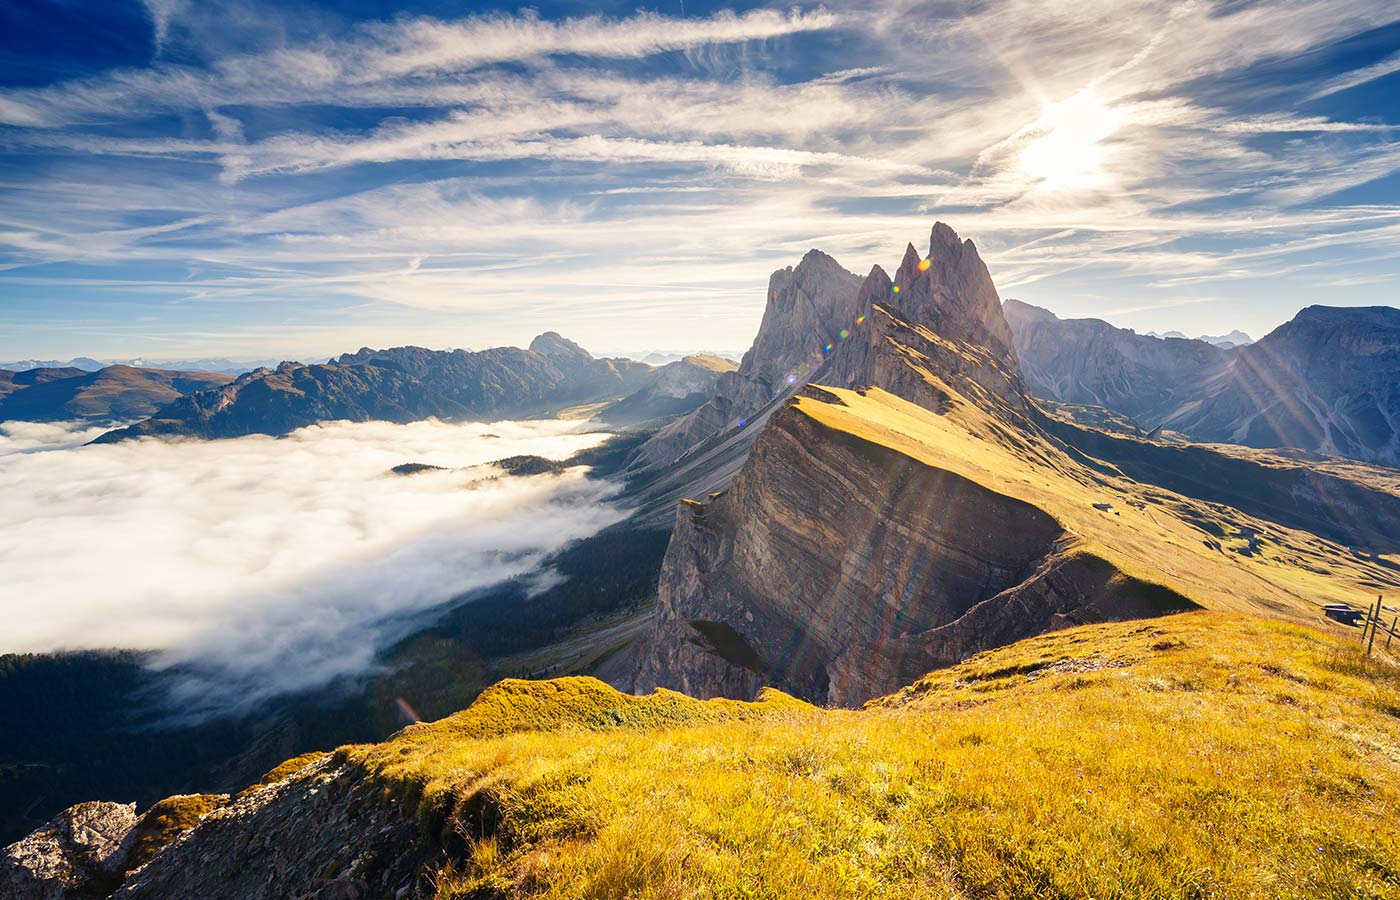 View of Dolomites in the sun with some clouds